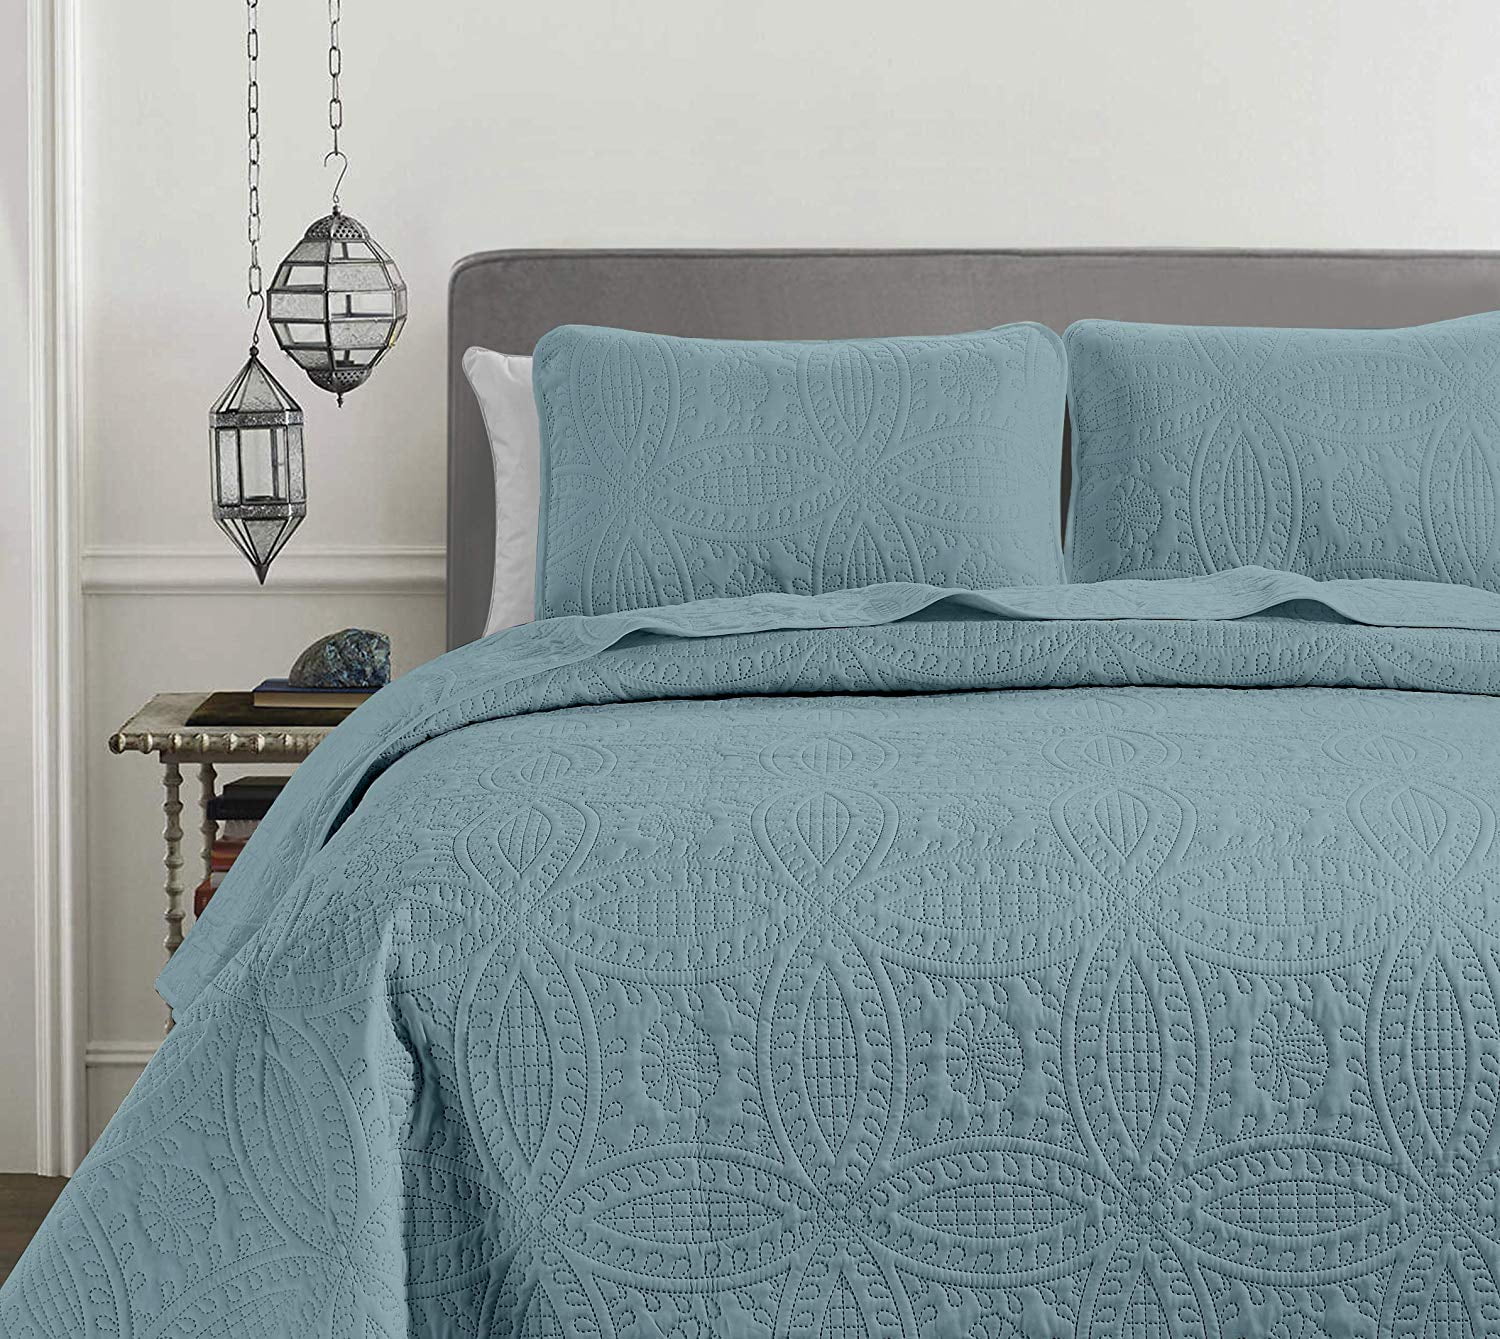 Details about   Chezmoi Collection 3-piece Oversized Bedspread Set Pinsonic Quilted Coverlet Set 